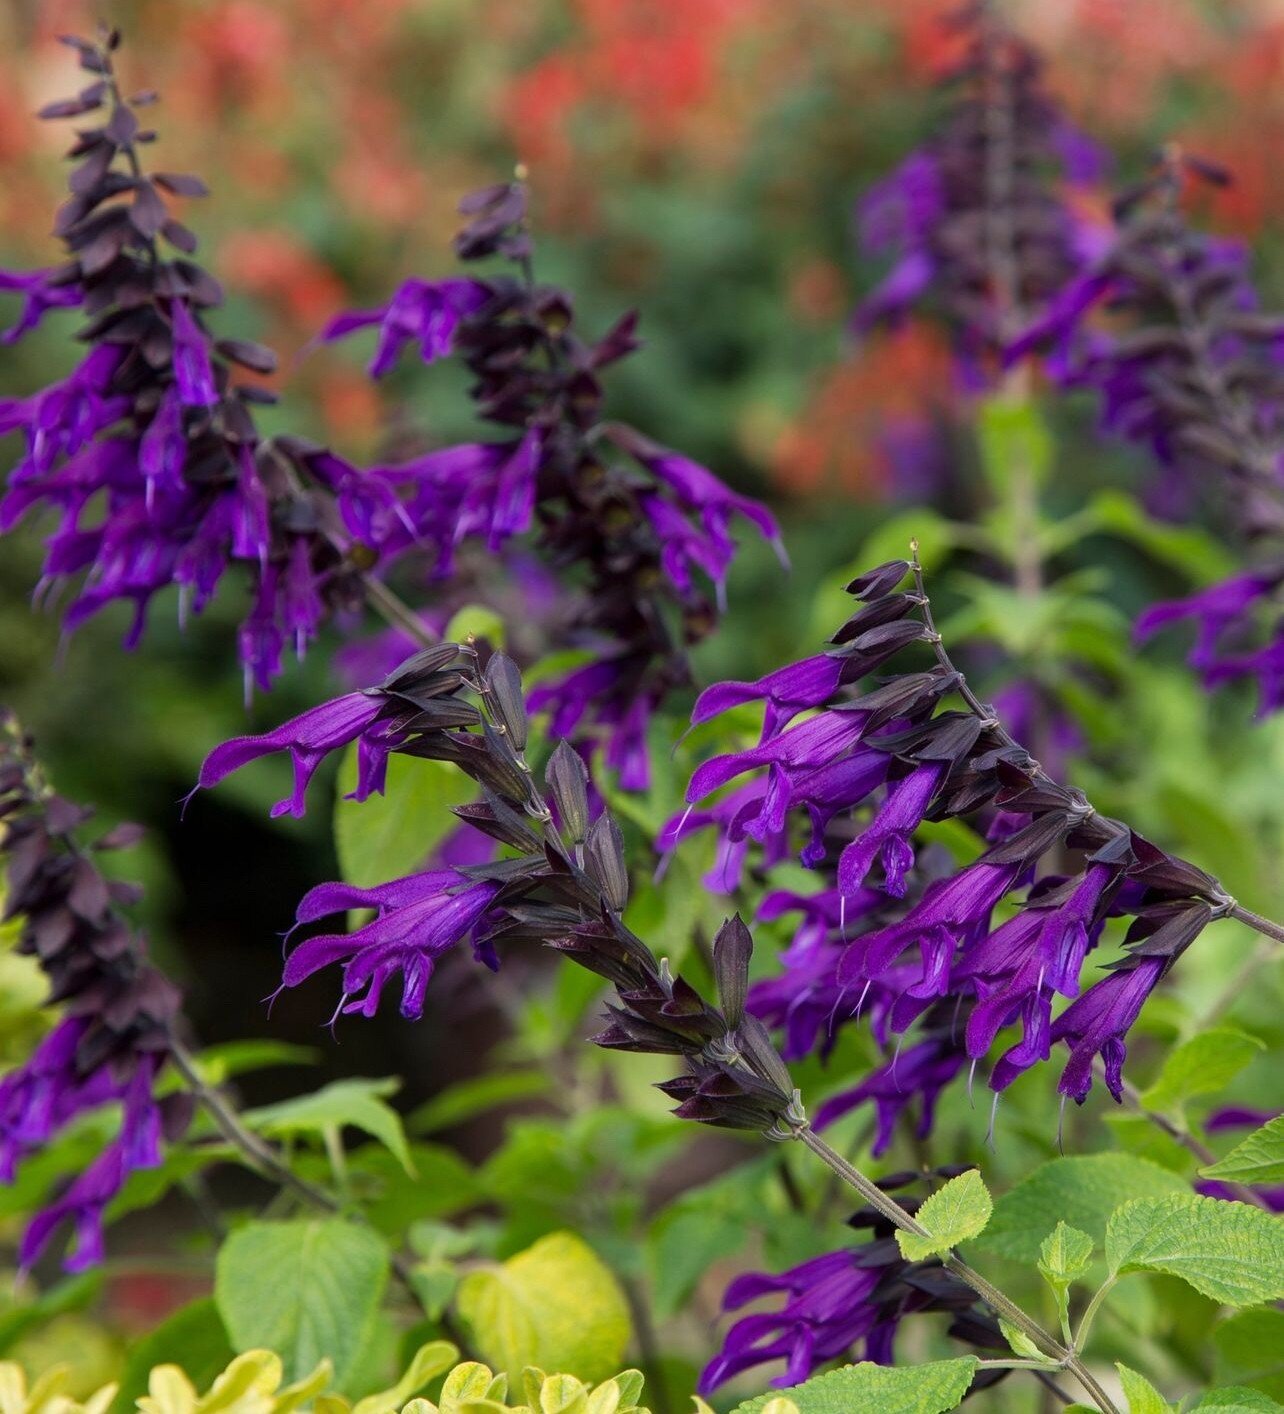 Isn't this the most amazing shade of violet? 💜 This is 'Amistad' Salvia, and it blooms nearly nonstop from spring to winter, sometimes even through winter in milder climates. No pruning is necessary with this low-maintenance beauty and it is a polli